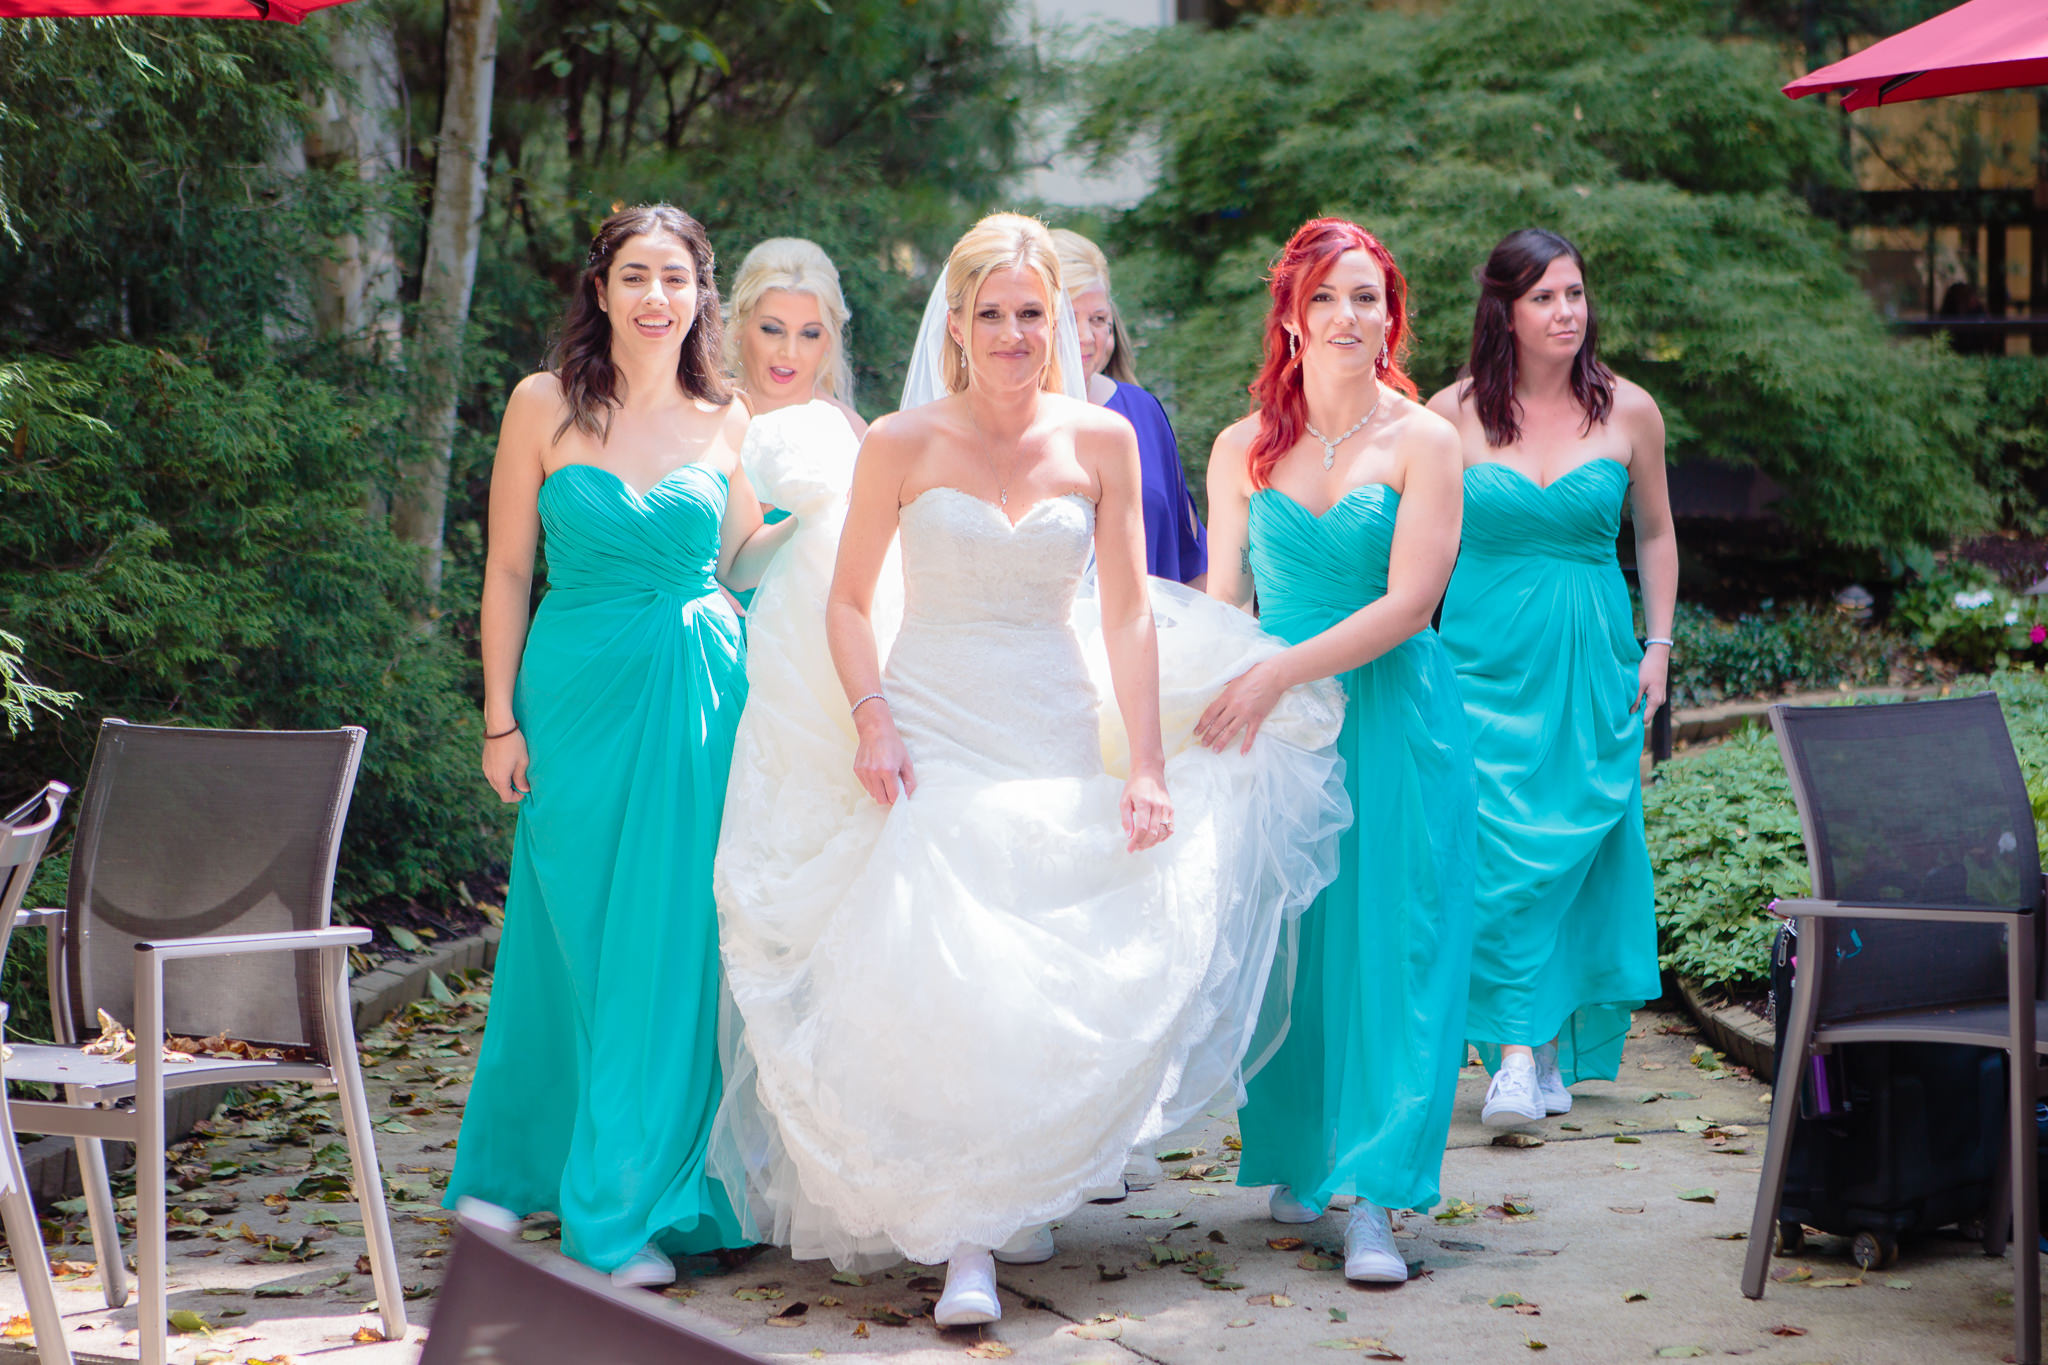 Bridesmaids help the bride walk to her first look in the Pittsburgh Airport Marriott courtyard